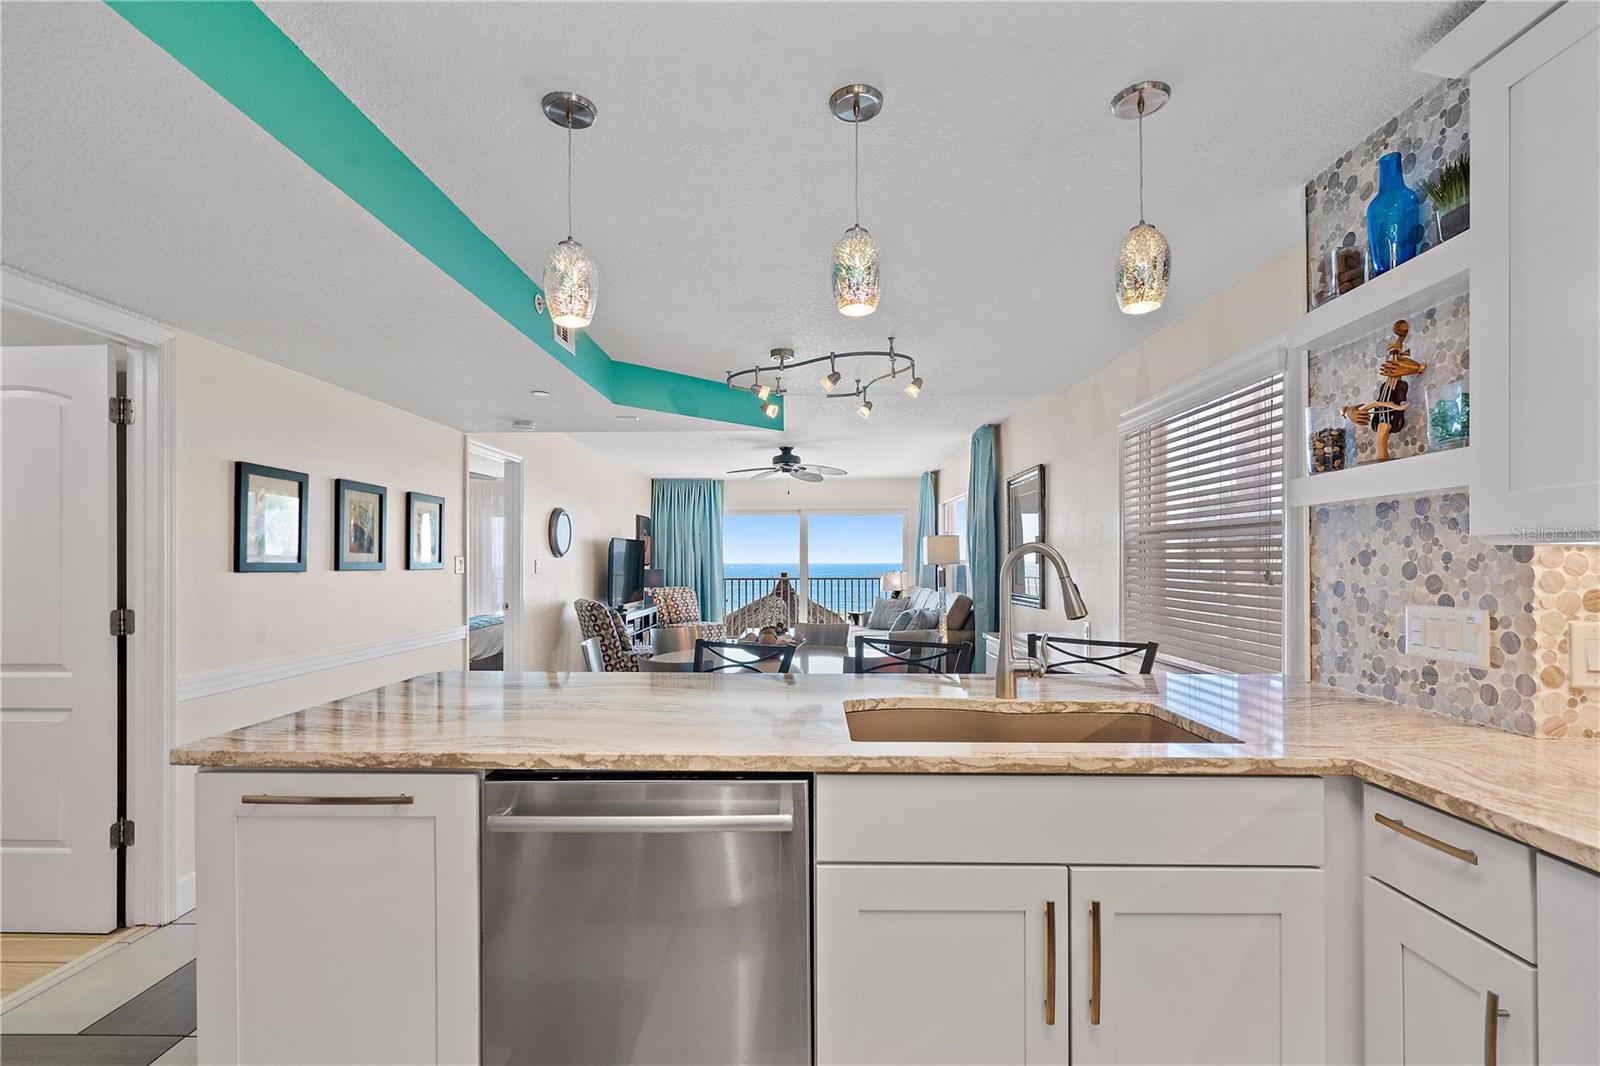 View the raised ceiling and overview of the common area and water when standing at the sink.